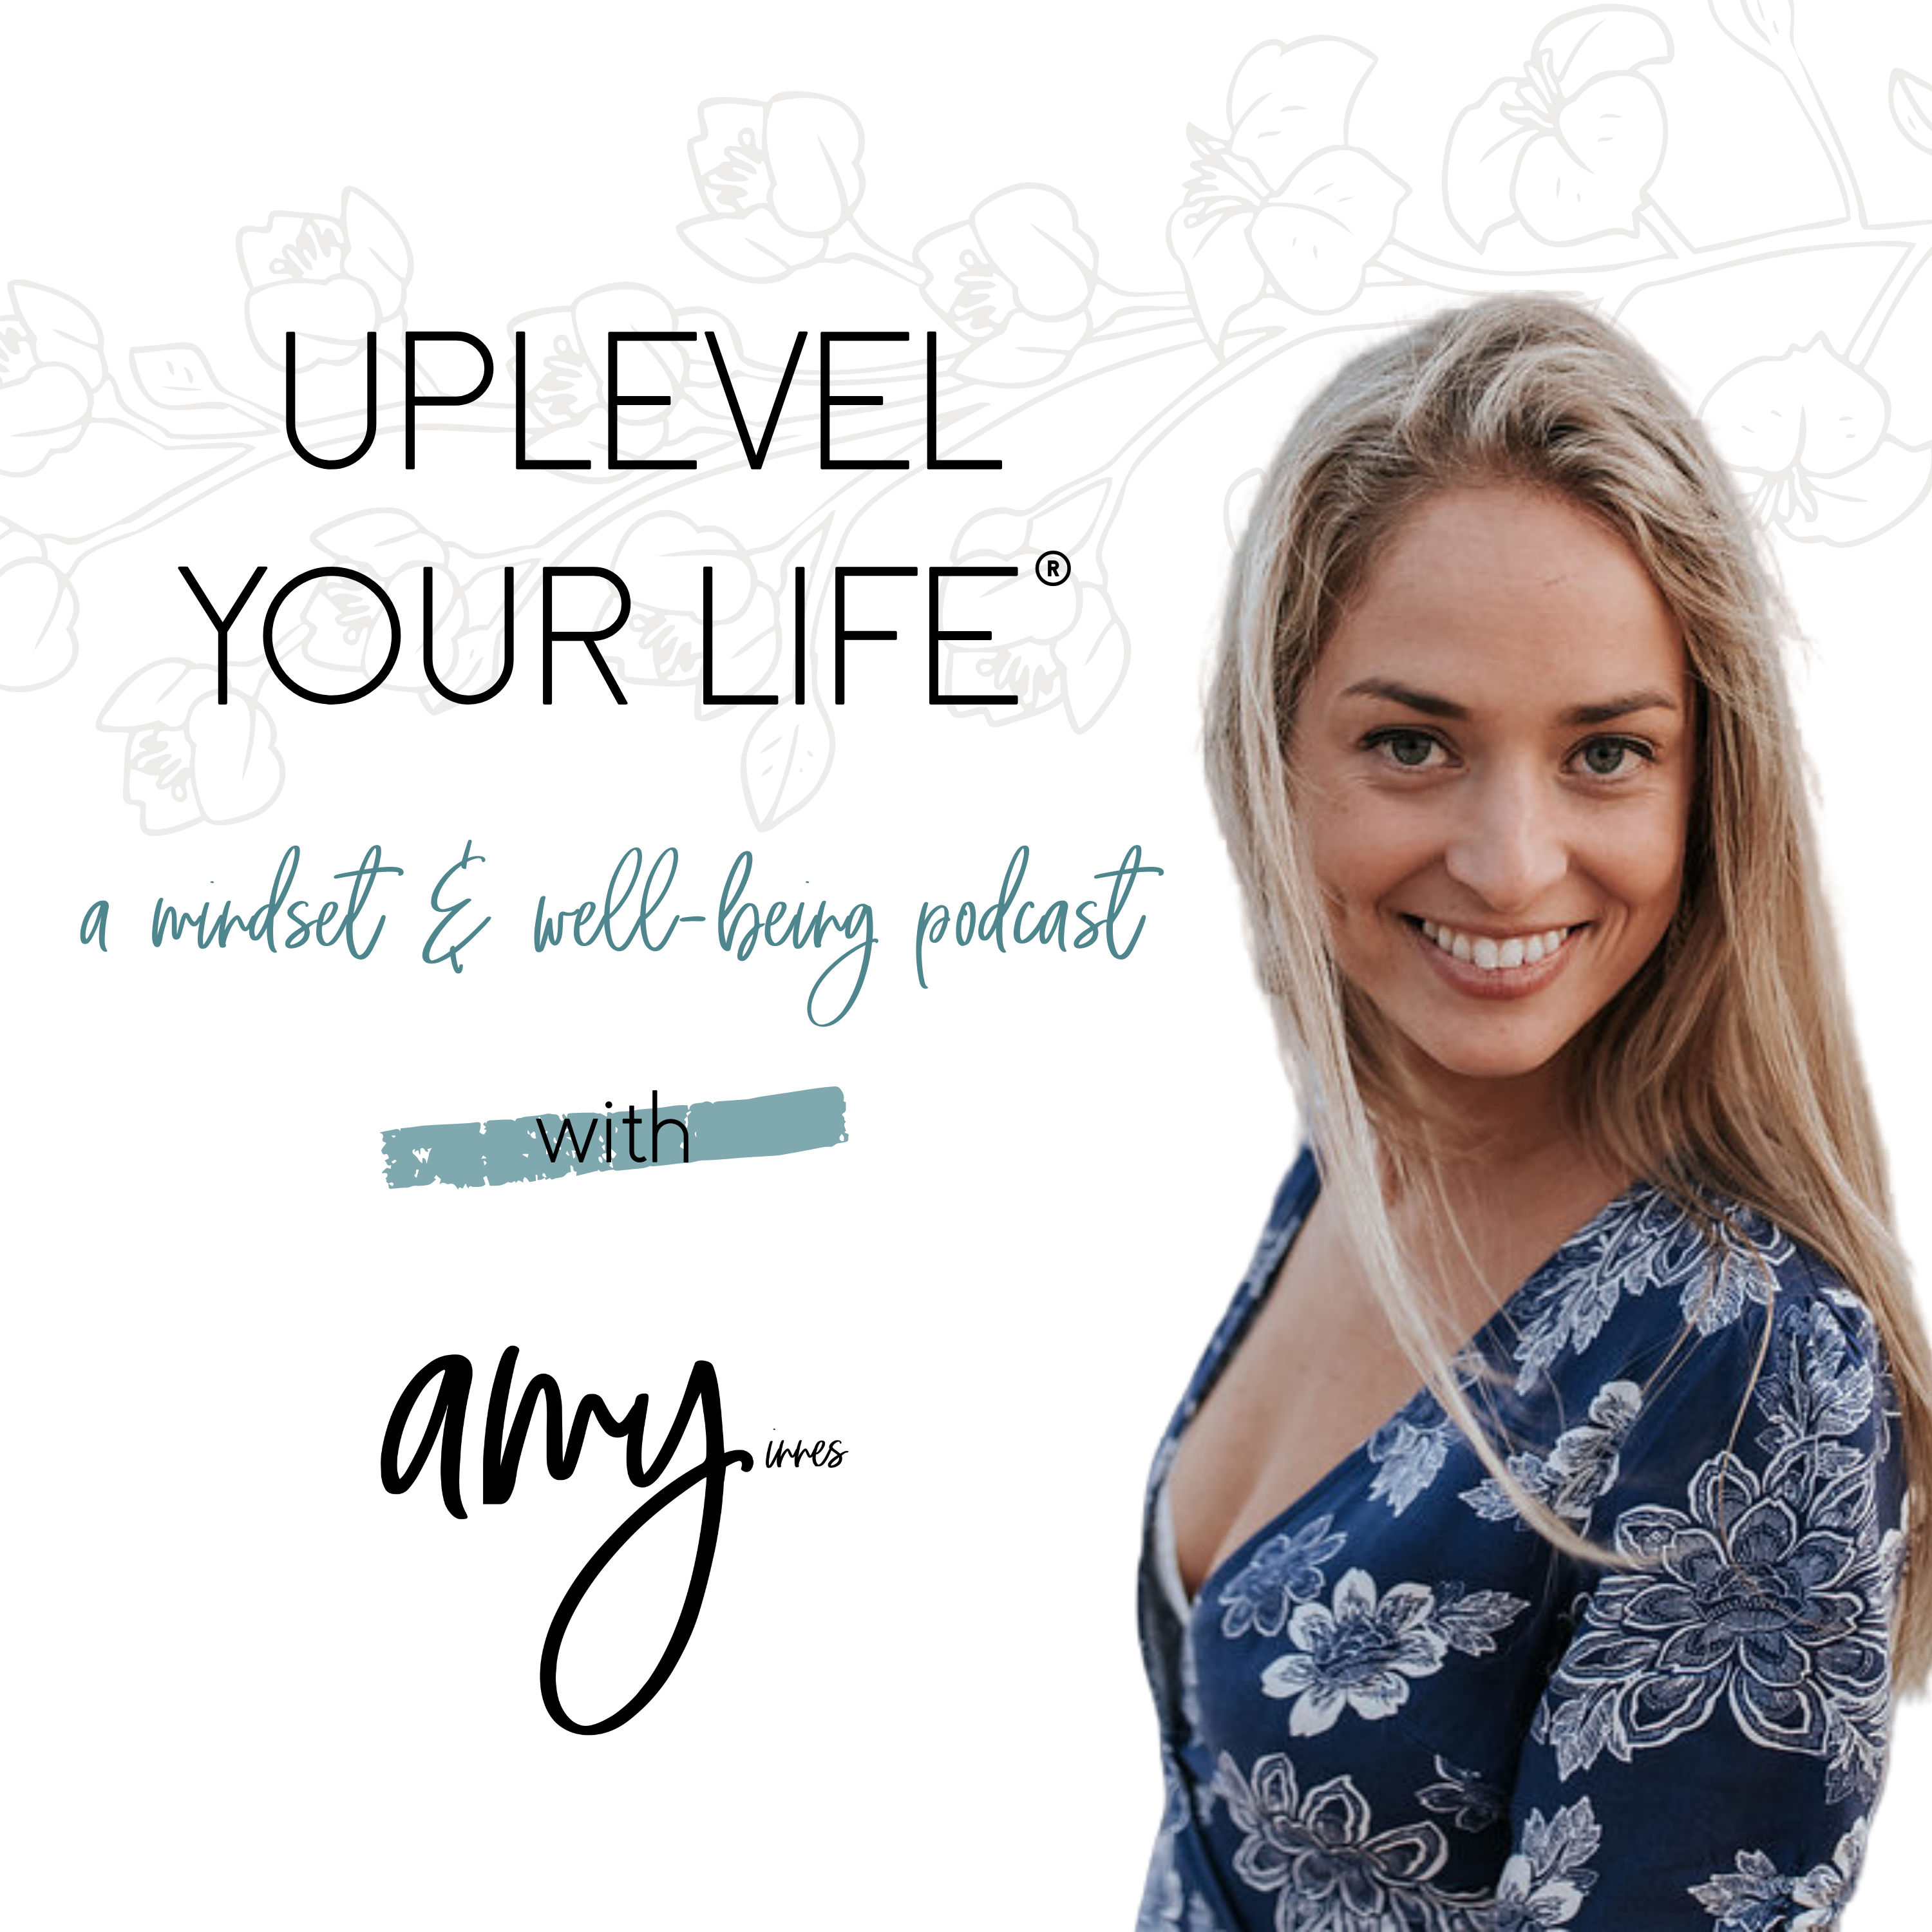 Ep 57: Kayleigh Kennedy - Fostering a positive mindset as a mother